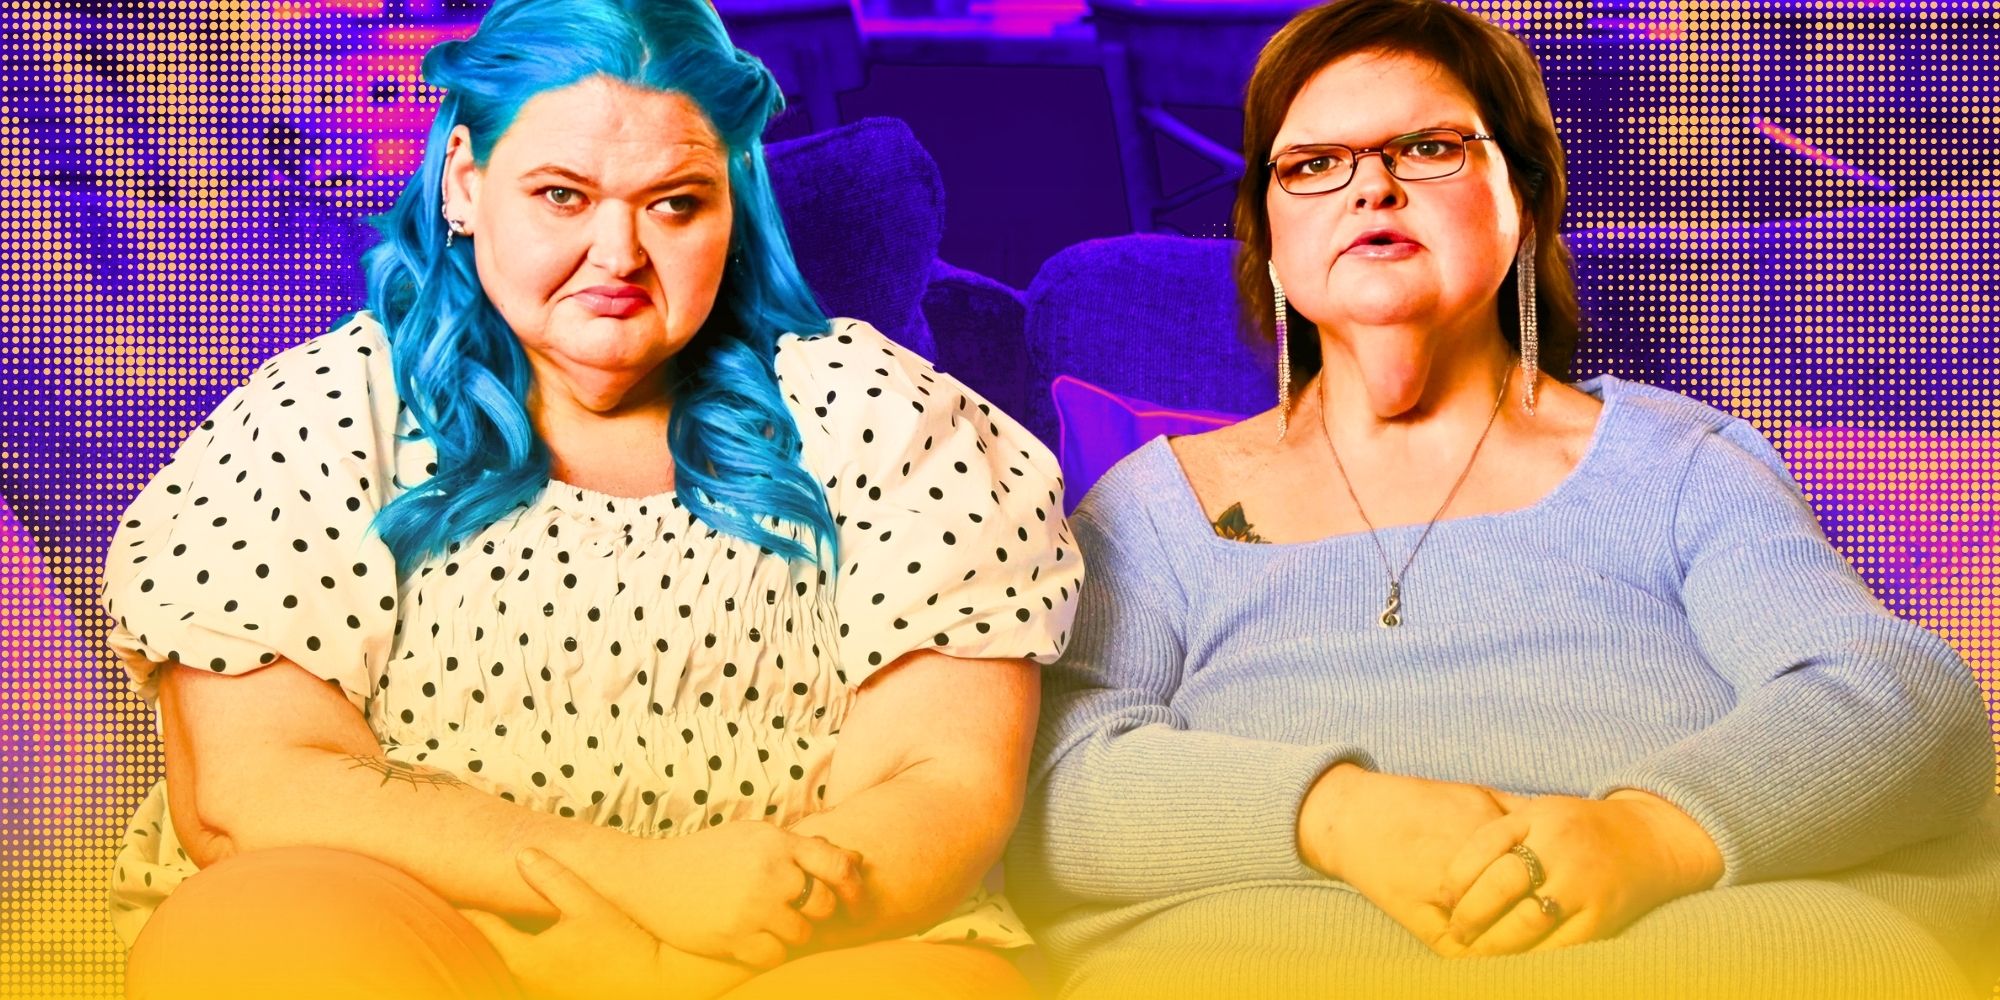 1000-Lb Sisters' stars Amy and Tammy Slaton side by side - Amy with blue hair and Tammy with long earrings.